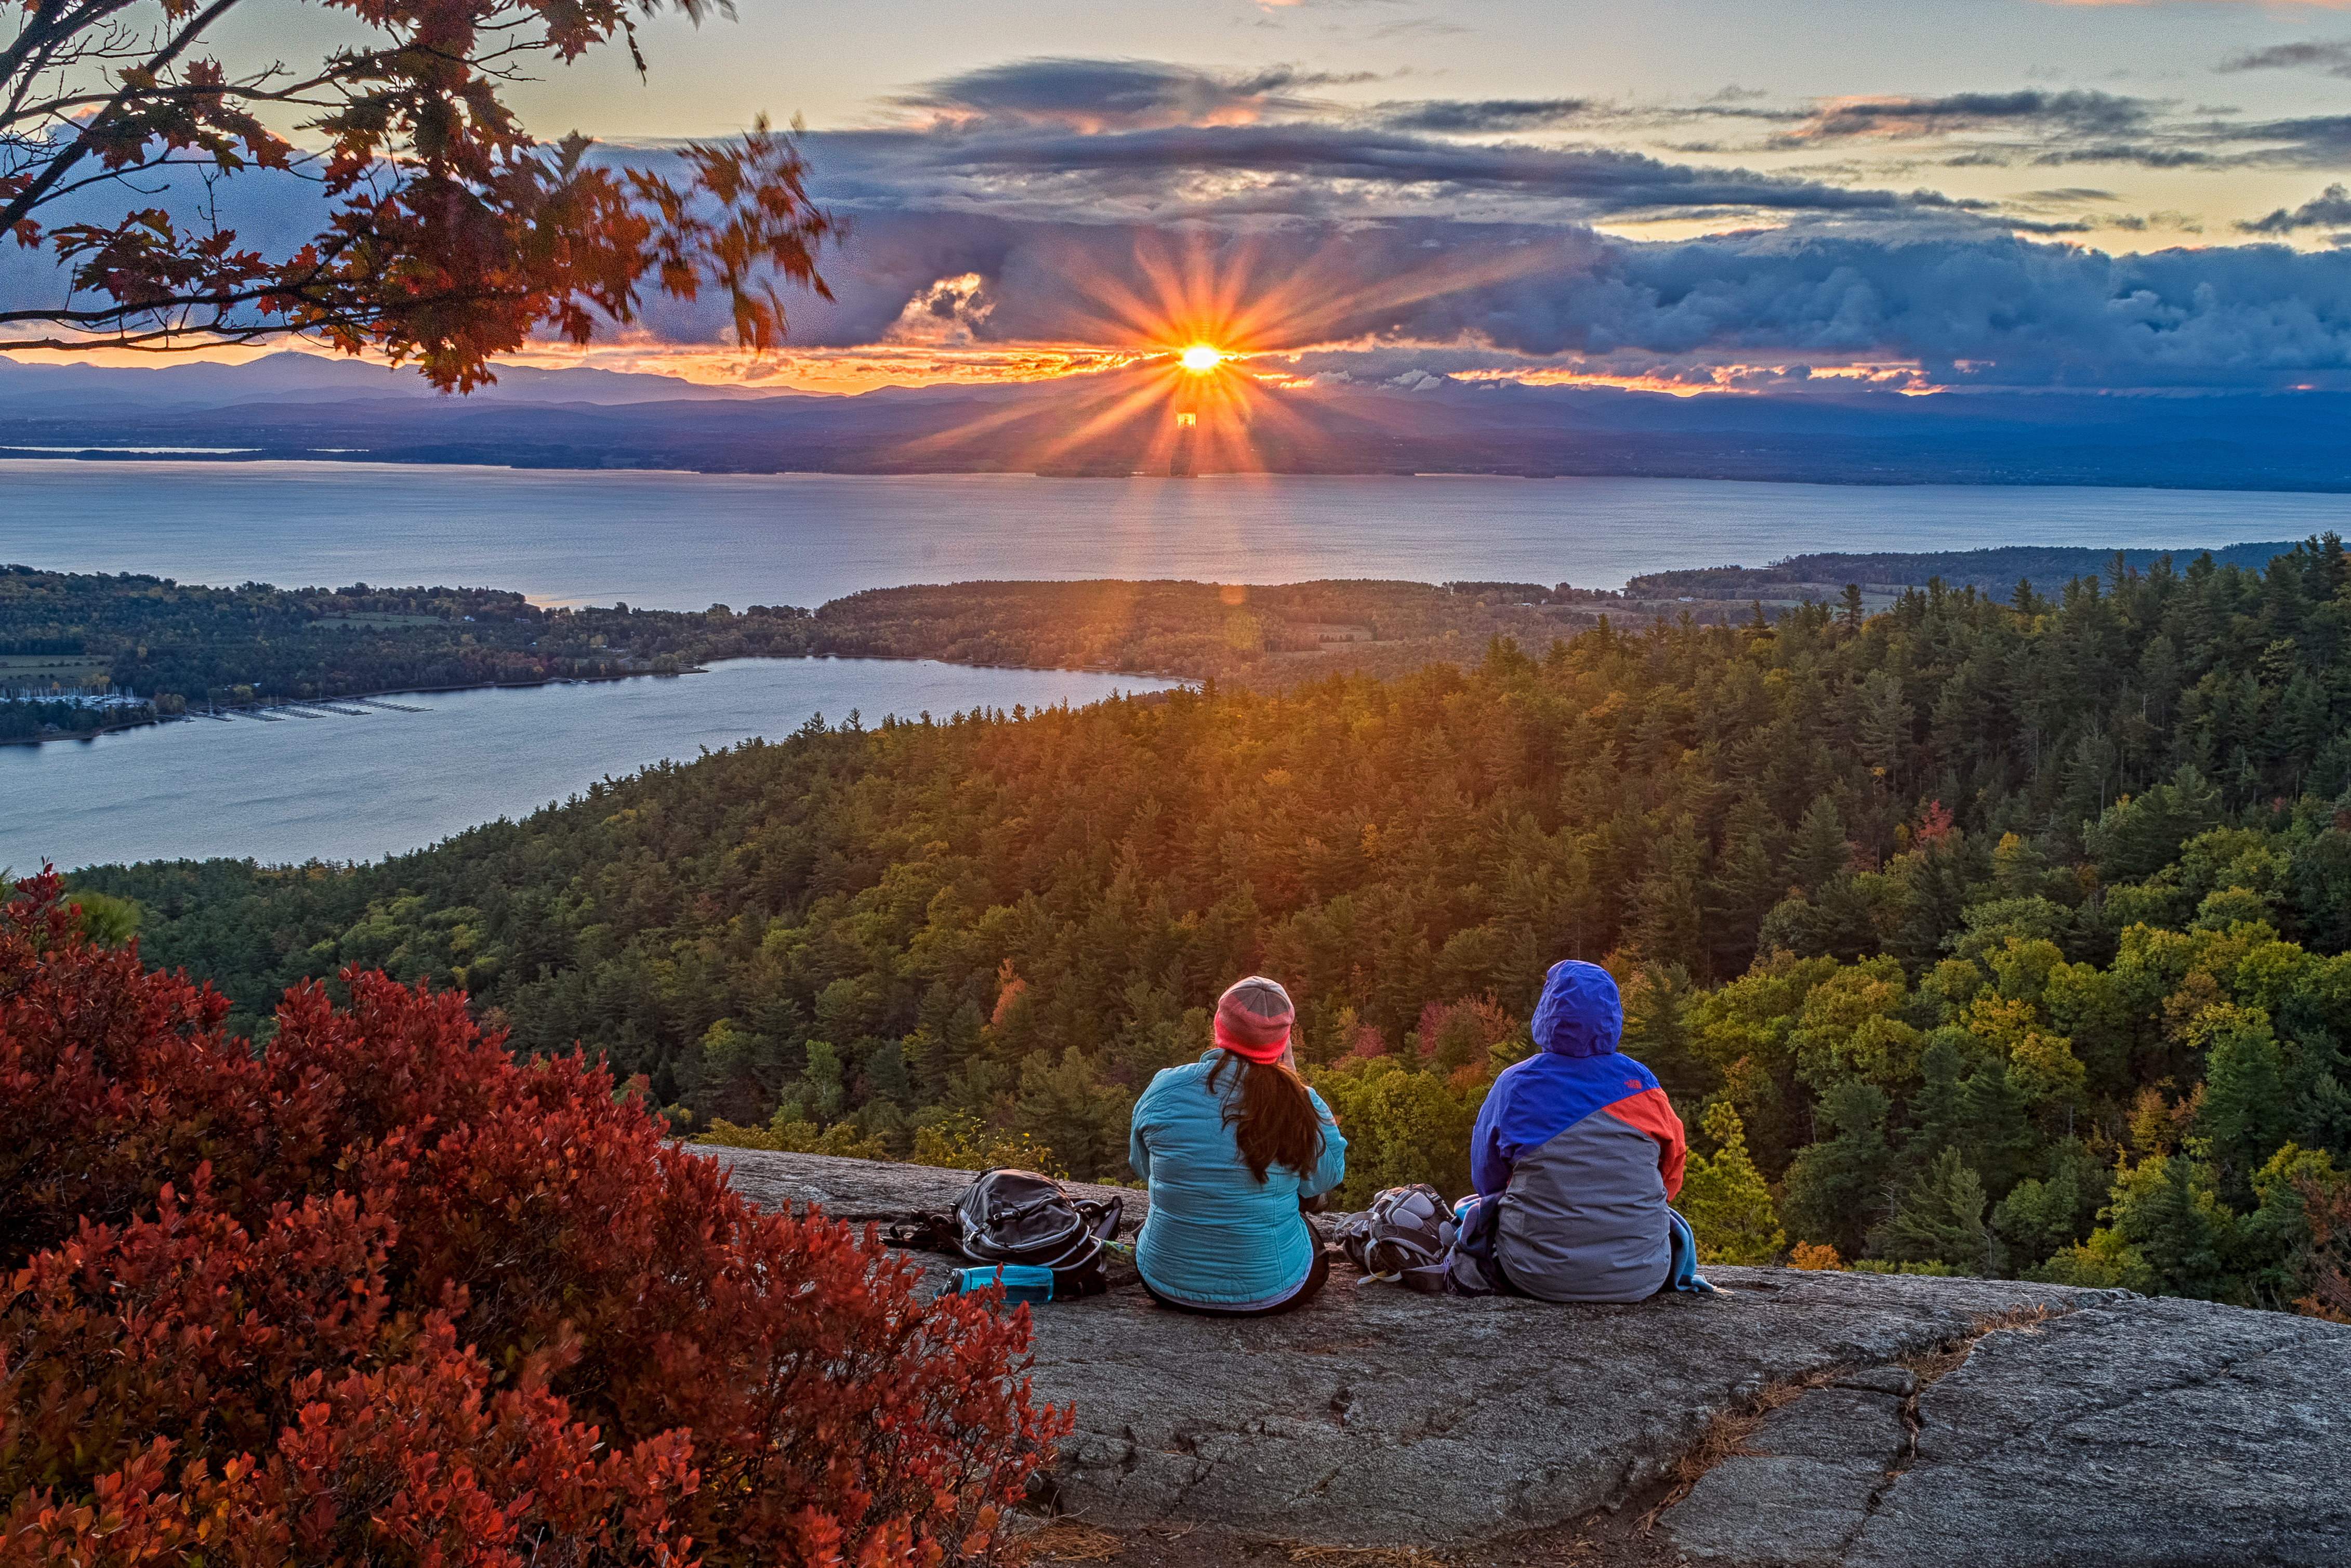 Hikers on a summit watching the sun rise.